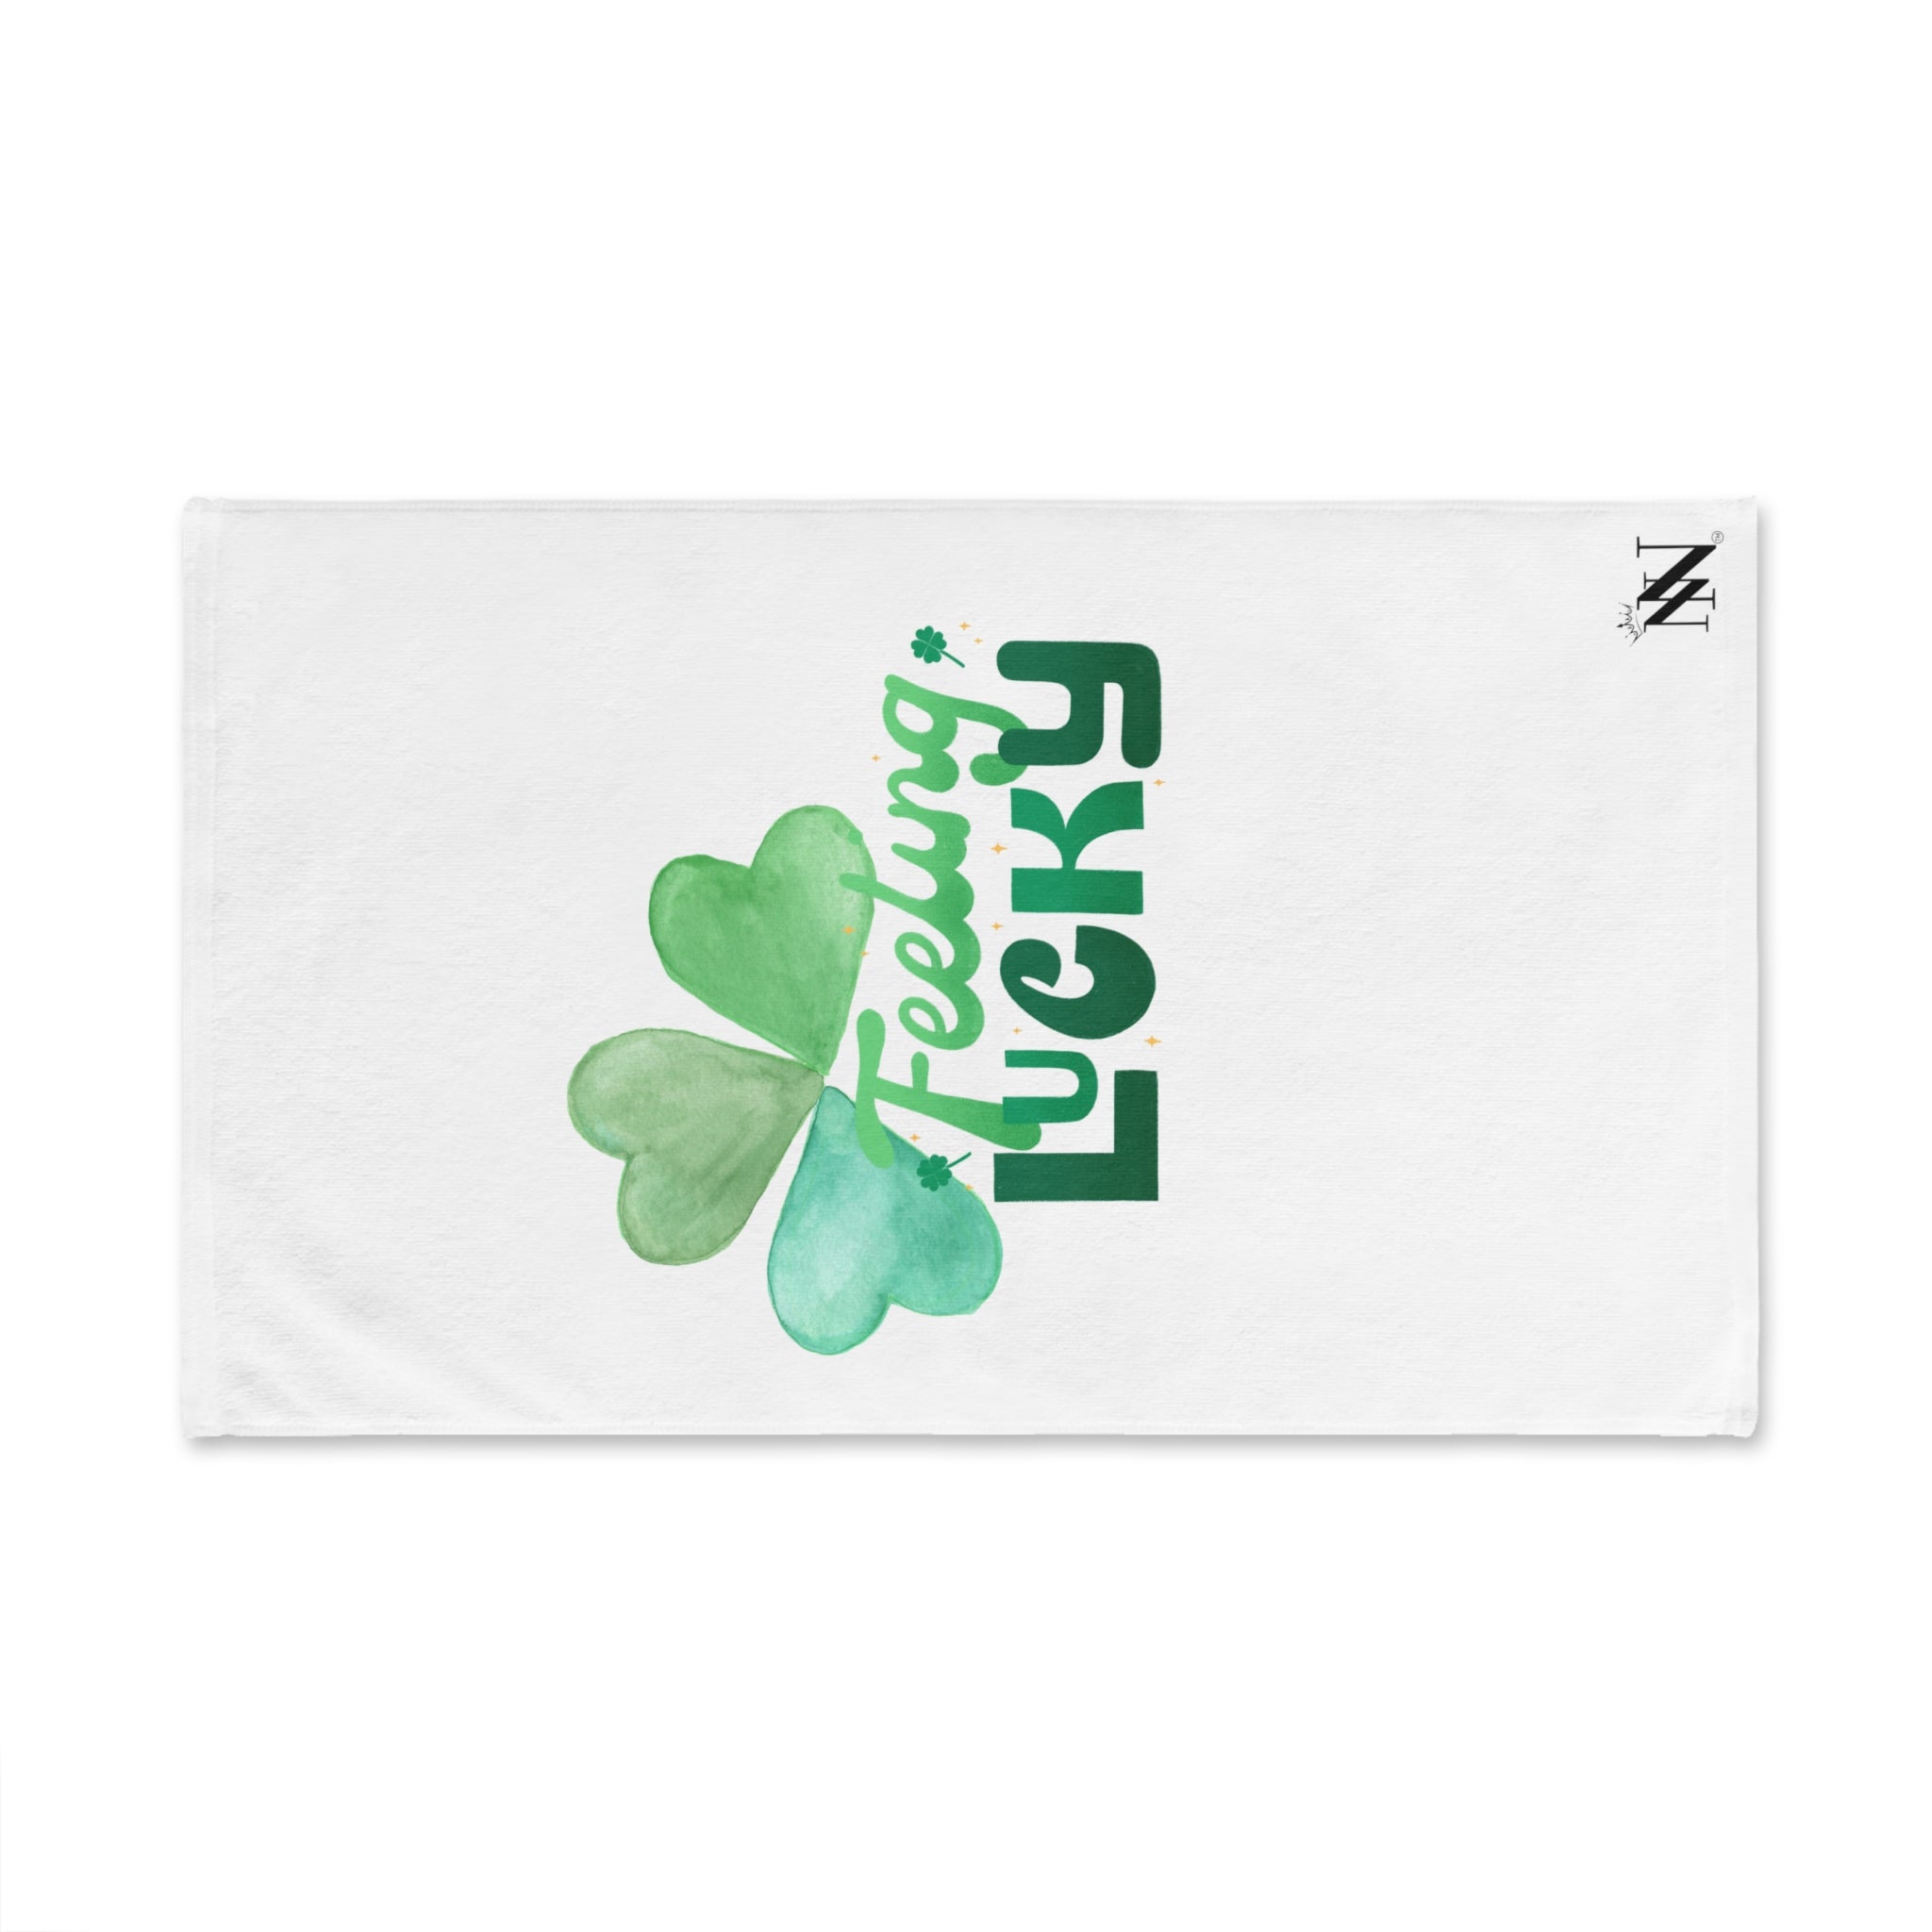 Feel Shamrock White | Funny Gifts for Men - Gifts for Him - Birthday Gifts for Men, Him, Her, Husband, Boyfriend, Girlfriend, New Couple Gifts, Fathers & Valentines Day Gifts, Christmas Gifts NECTAR NAPKINS